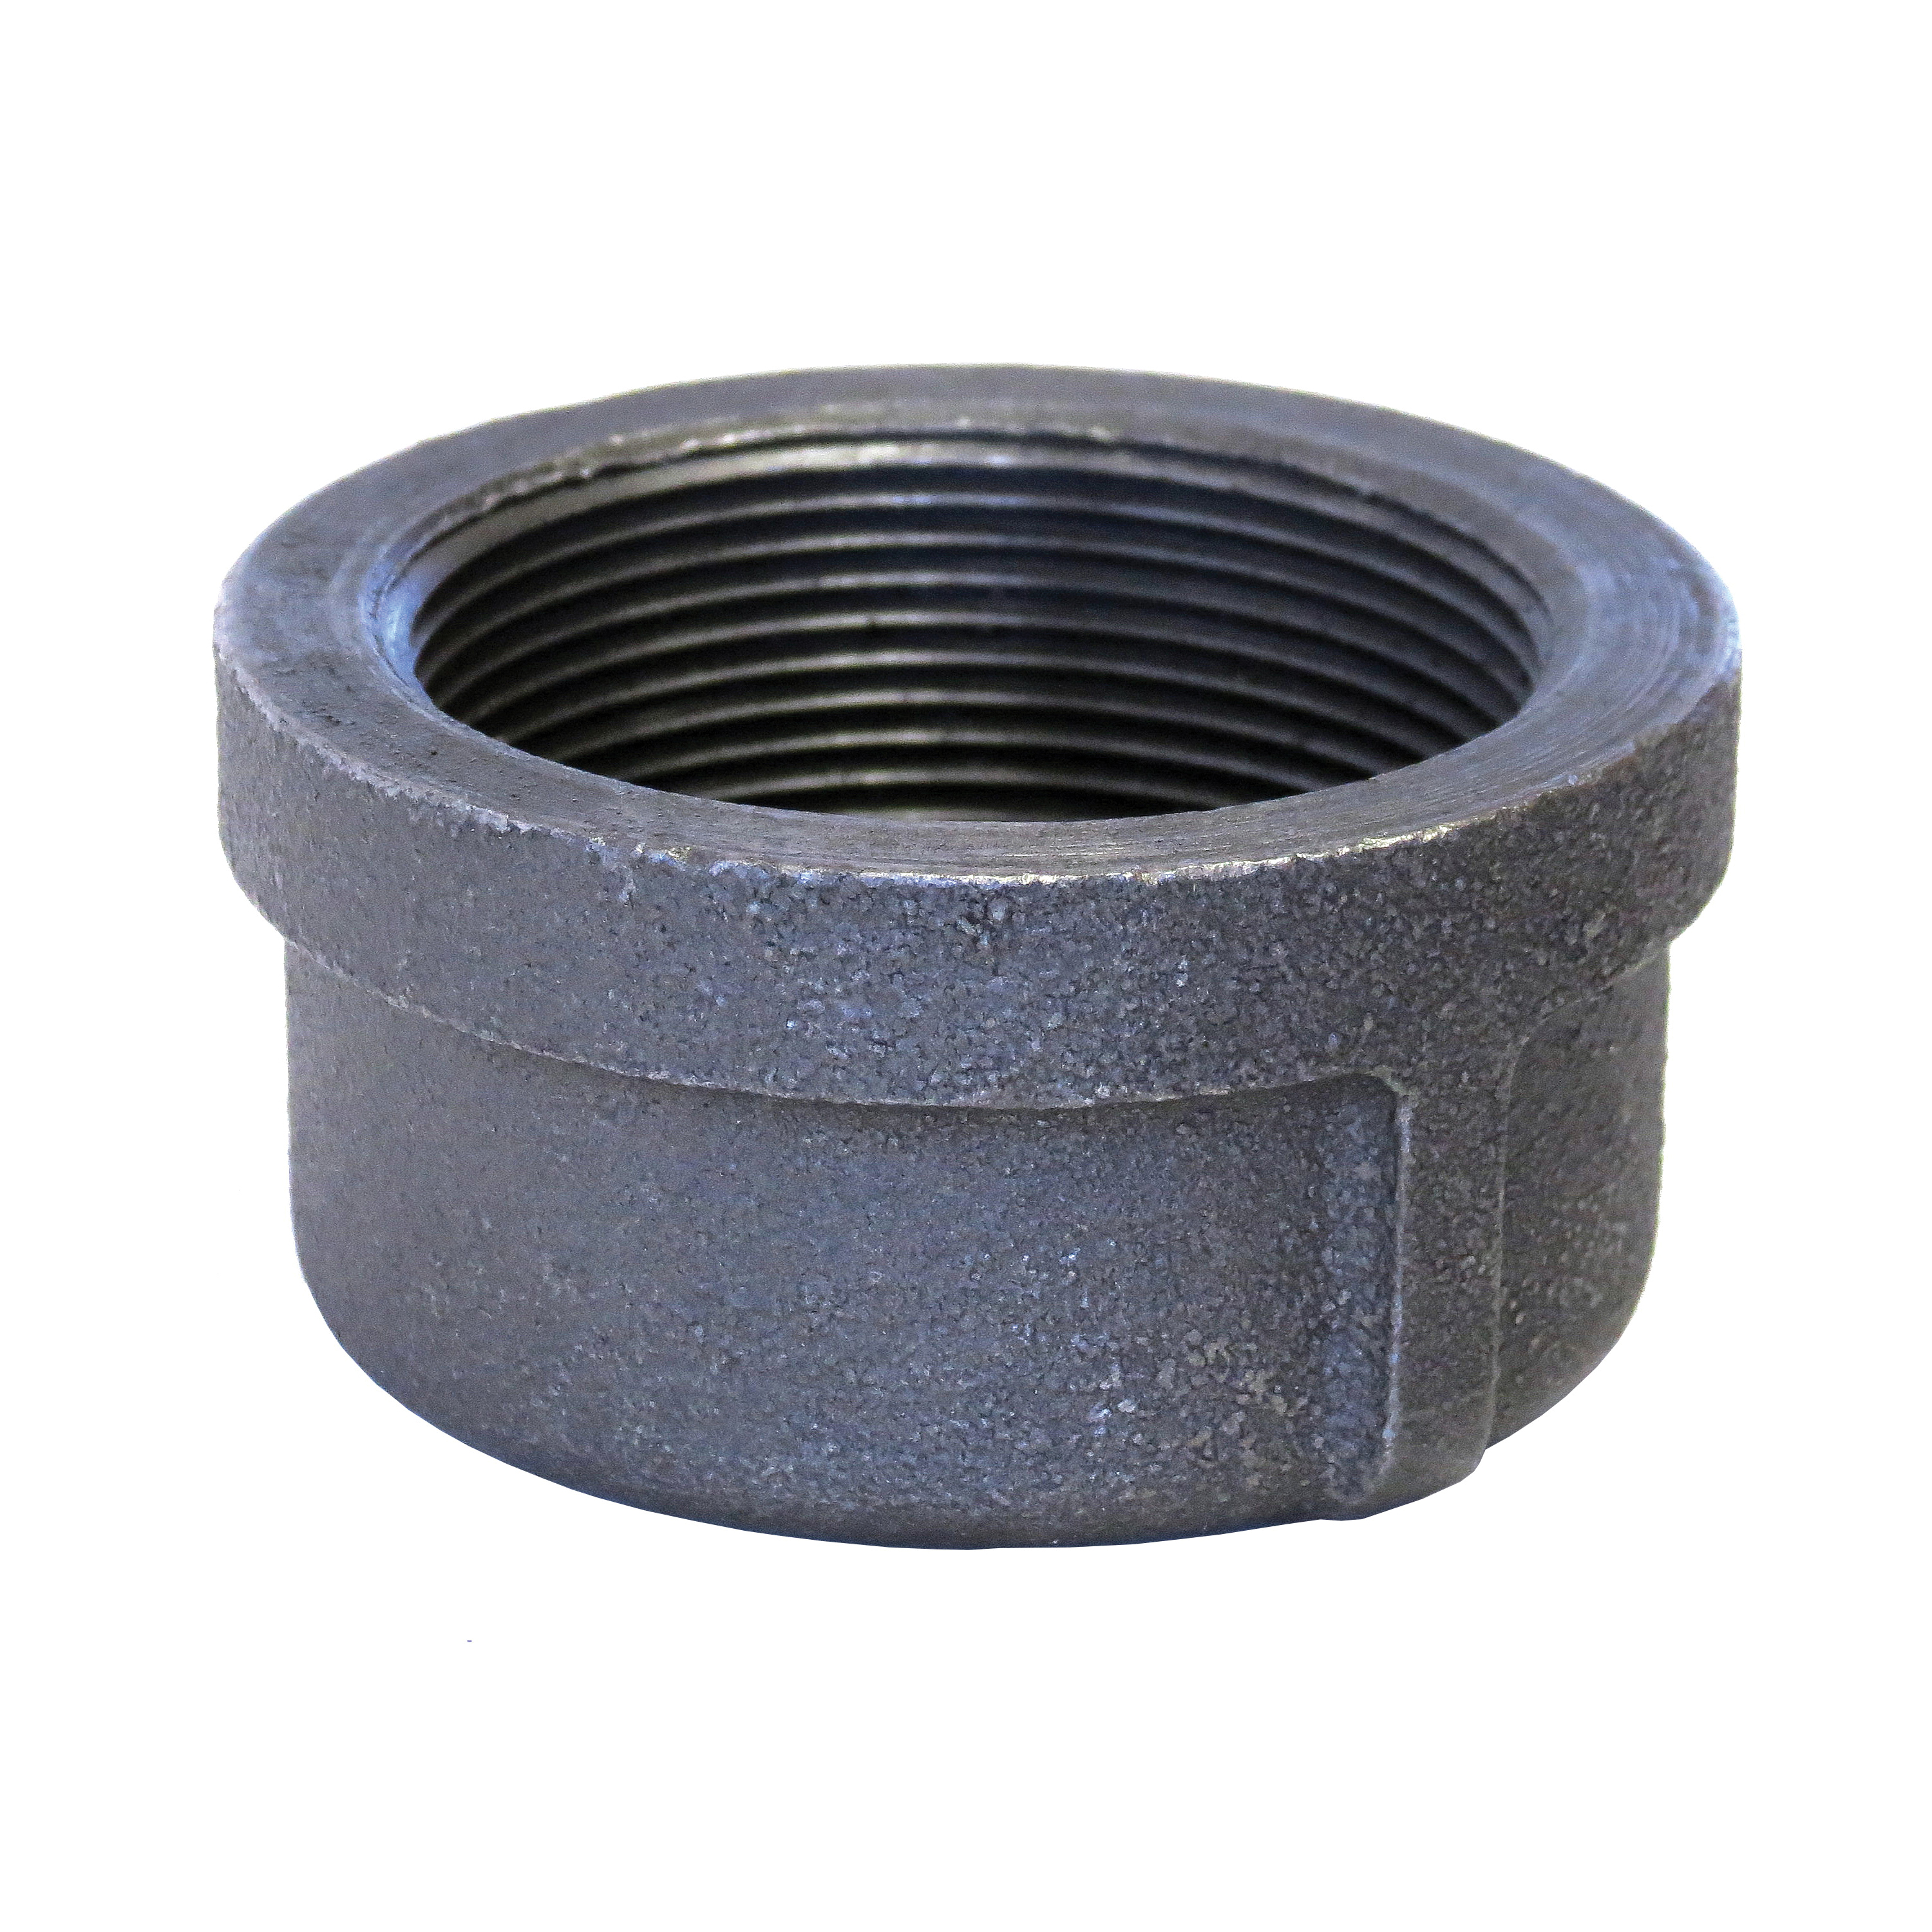 SPF/Anvil™ 0818900532 FIG 3124 Standard Pipe Cap, 1/2 in Nominal, FNPT End Style, 150 lb, Malleable Iron, Black Oxide, Import